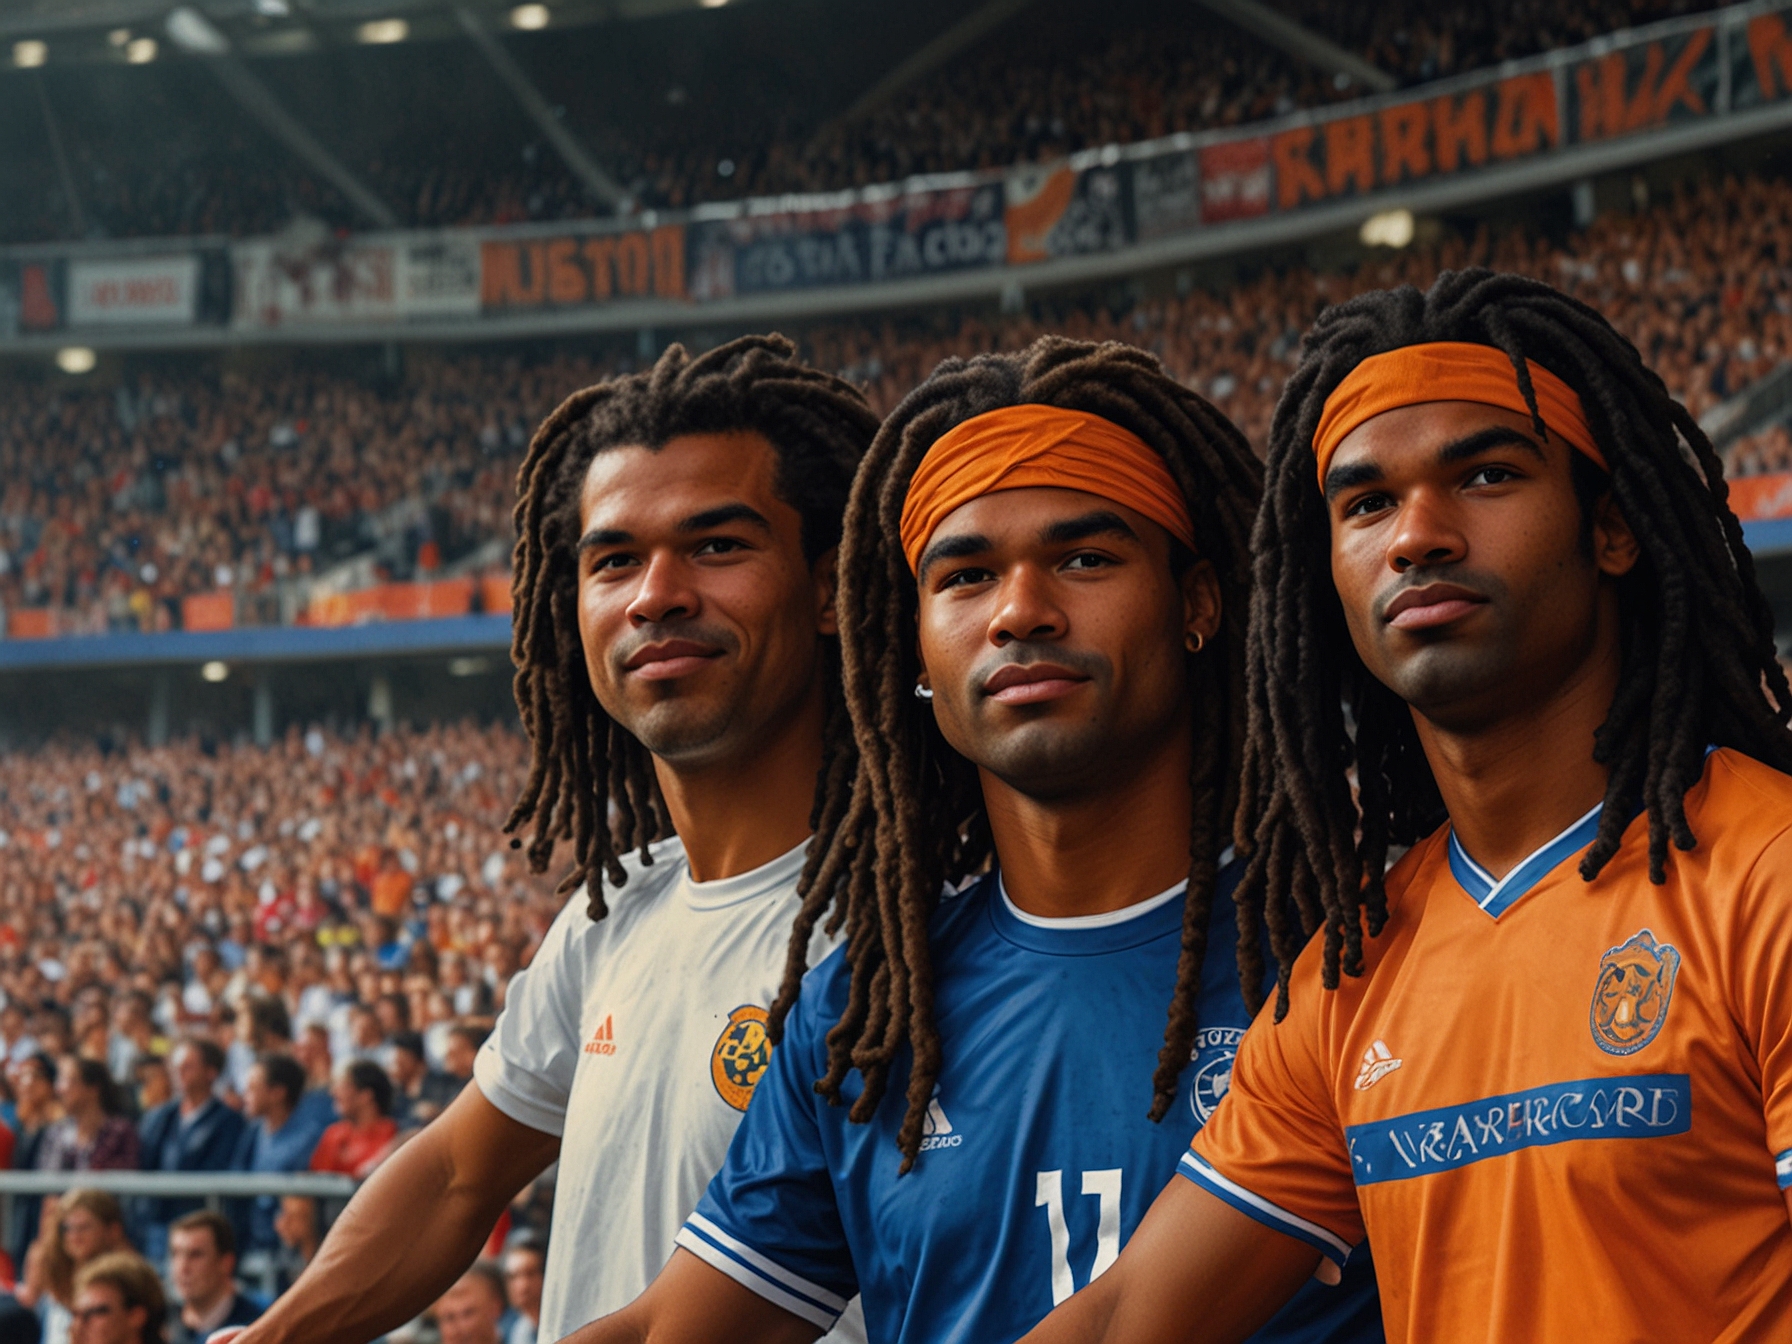 Fans in a stadium dressed up as Ruud Gullit, with painted faces and dreadlocked wigs, showing their admiration for the iconic Dutch footballer, sparking a debate on racial sensitivity.